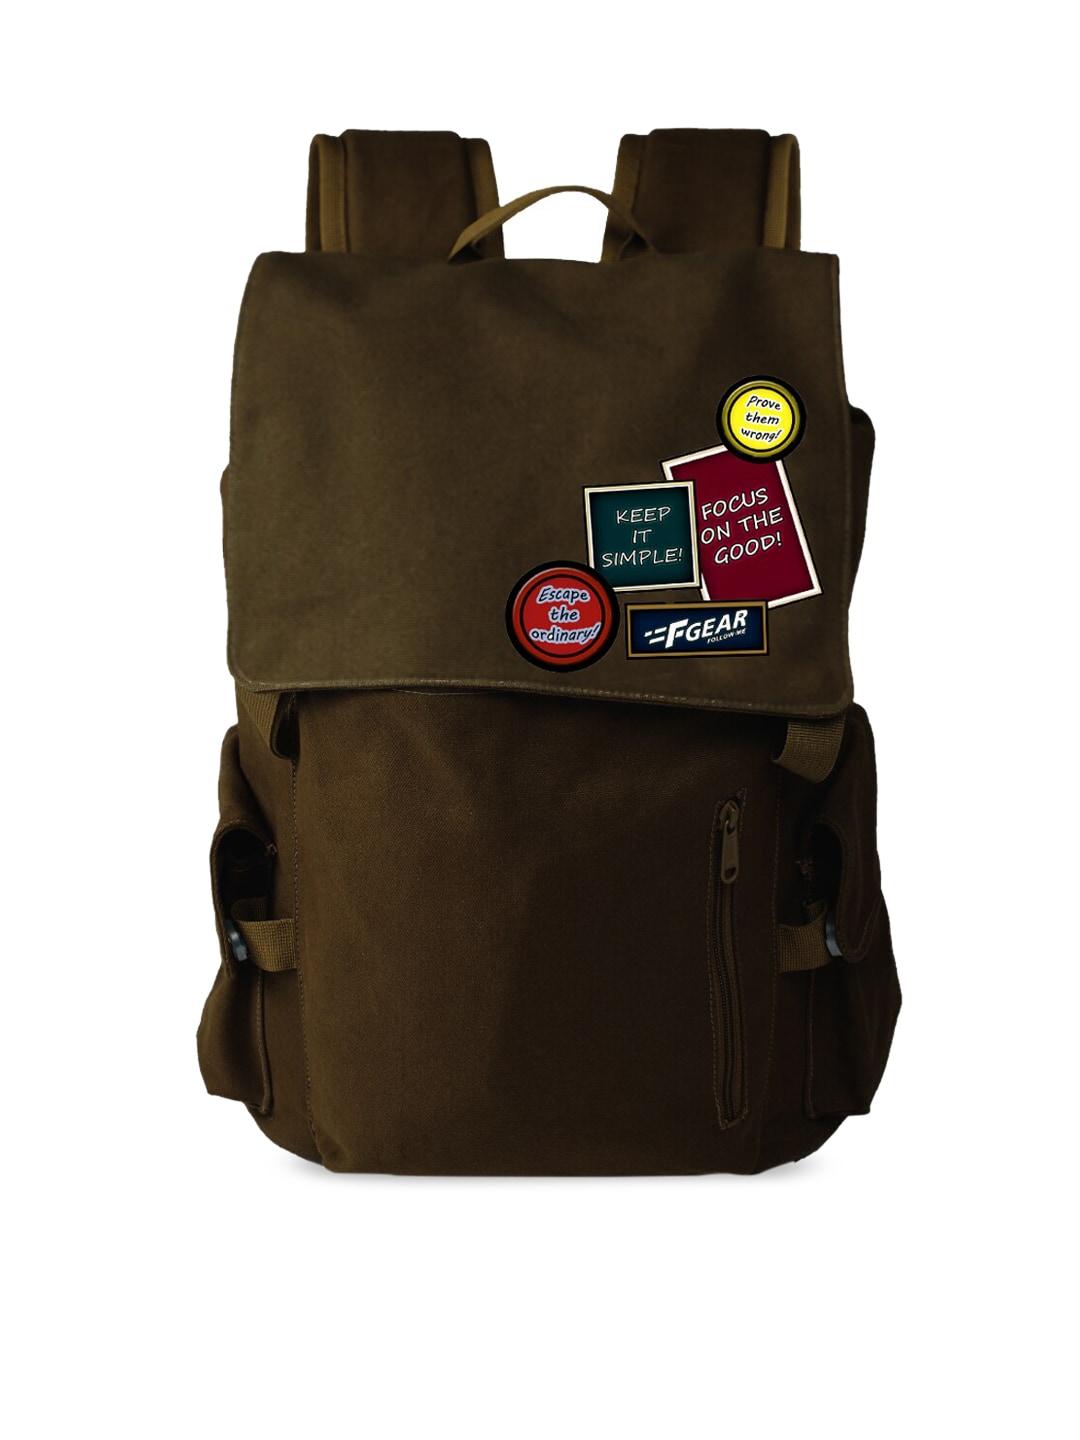 f gear unisex olive green graphic backpack